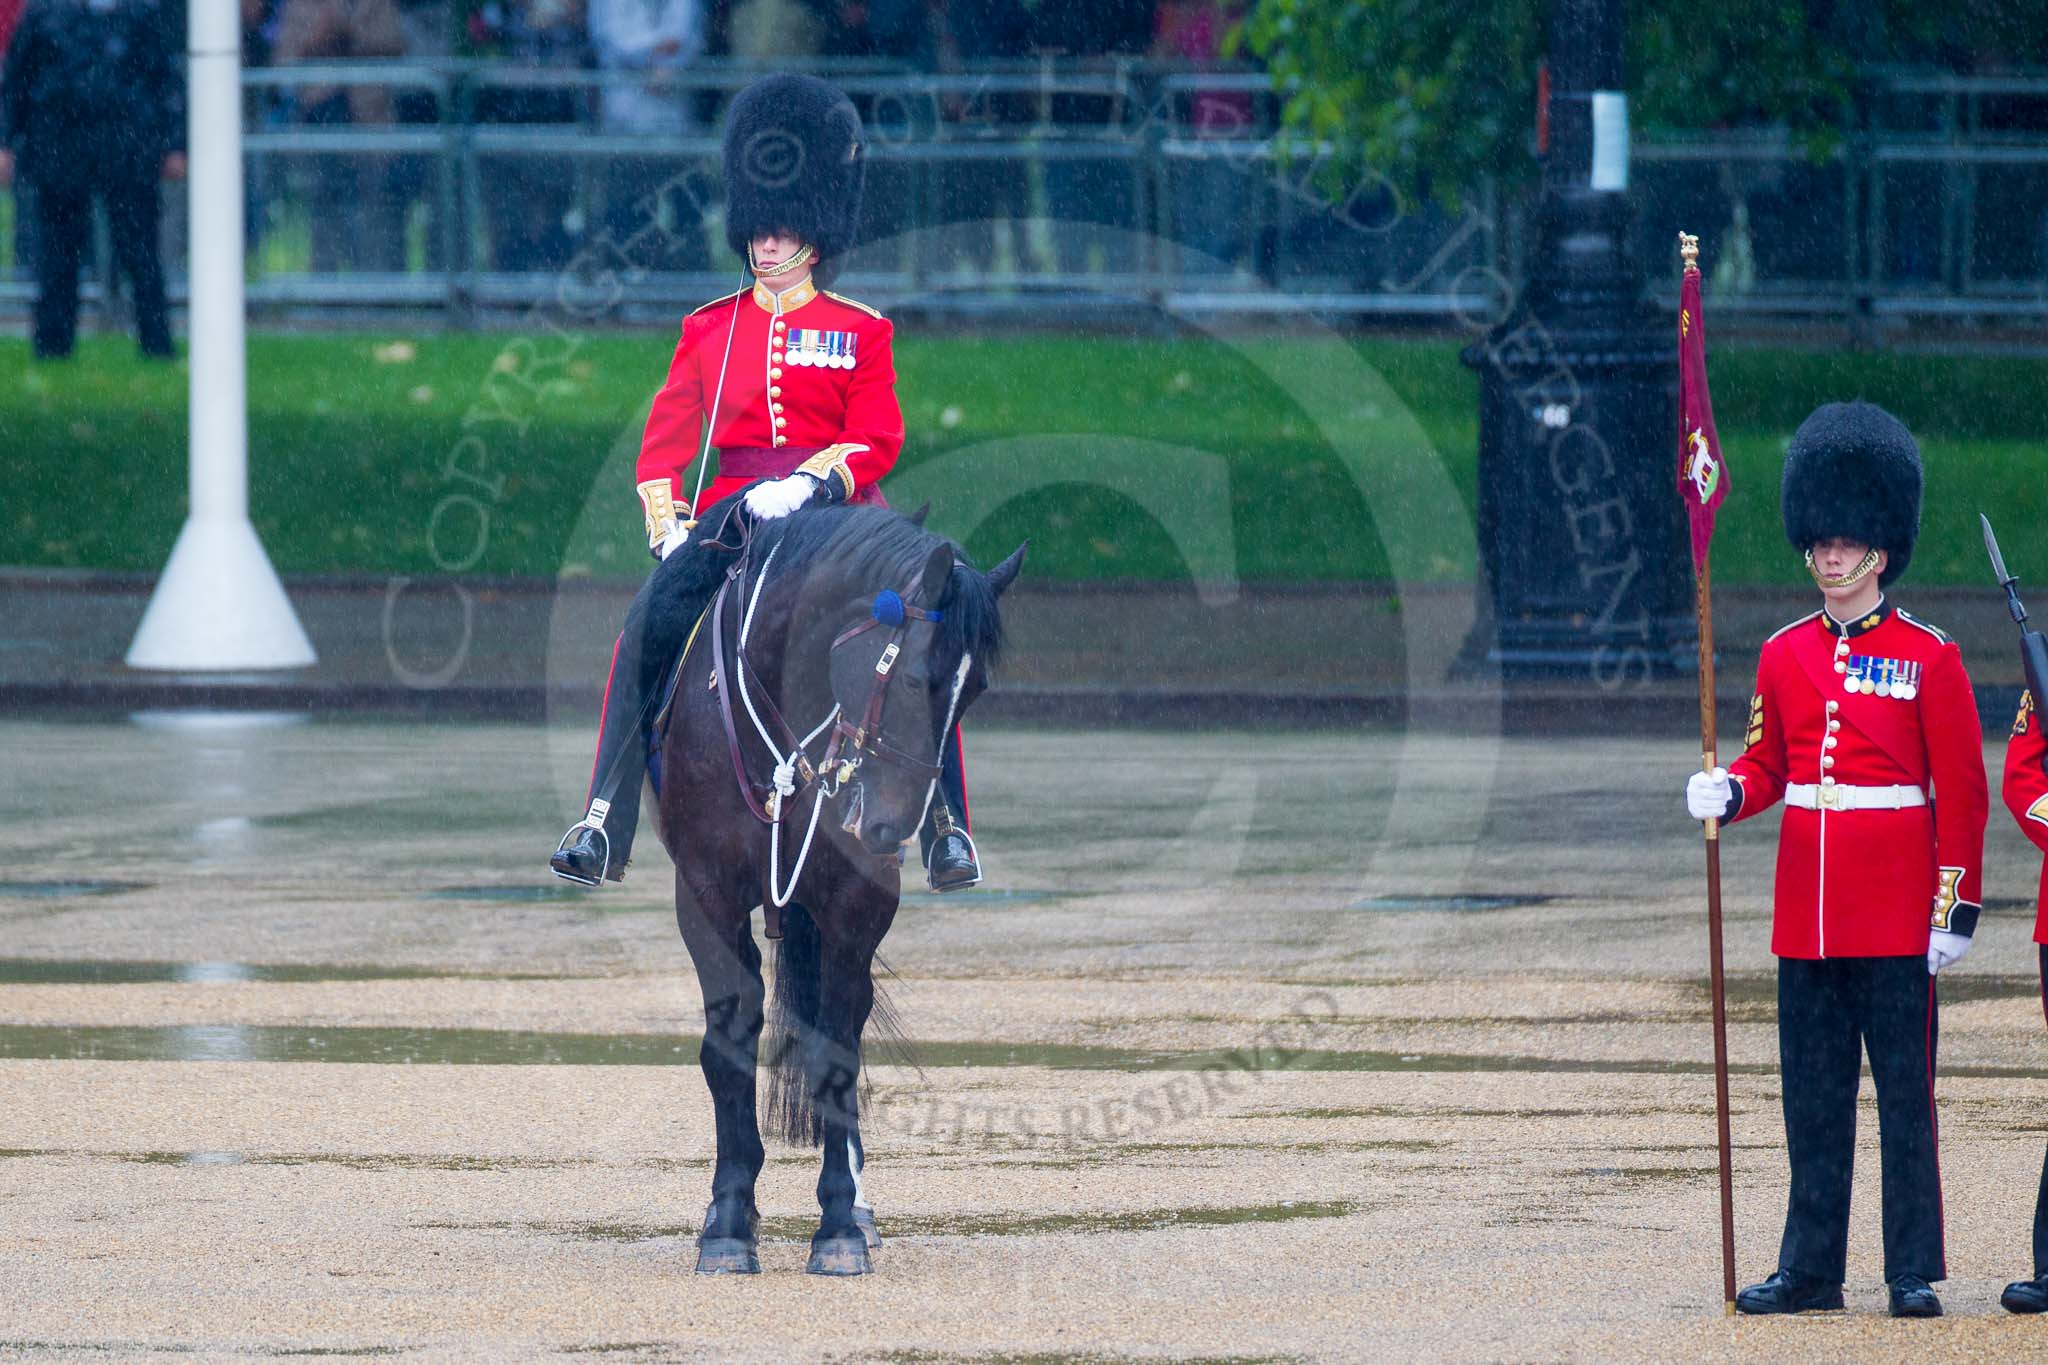 The Colonel's Review 2014.
Horse Guards Parade, Westminster,
London,

United Kingdom,
on 07 June 2014 at 10:43, image #173